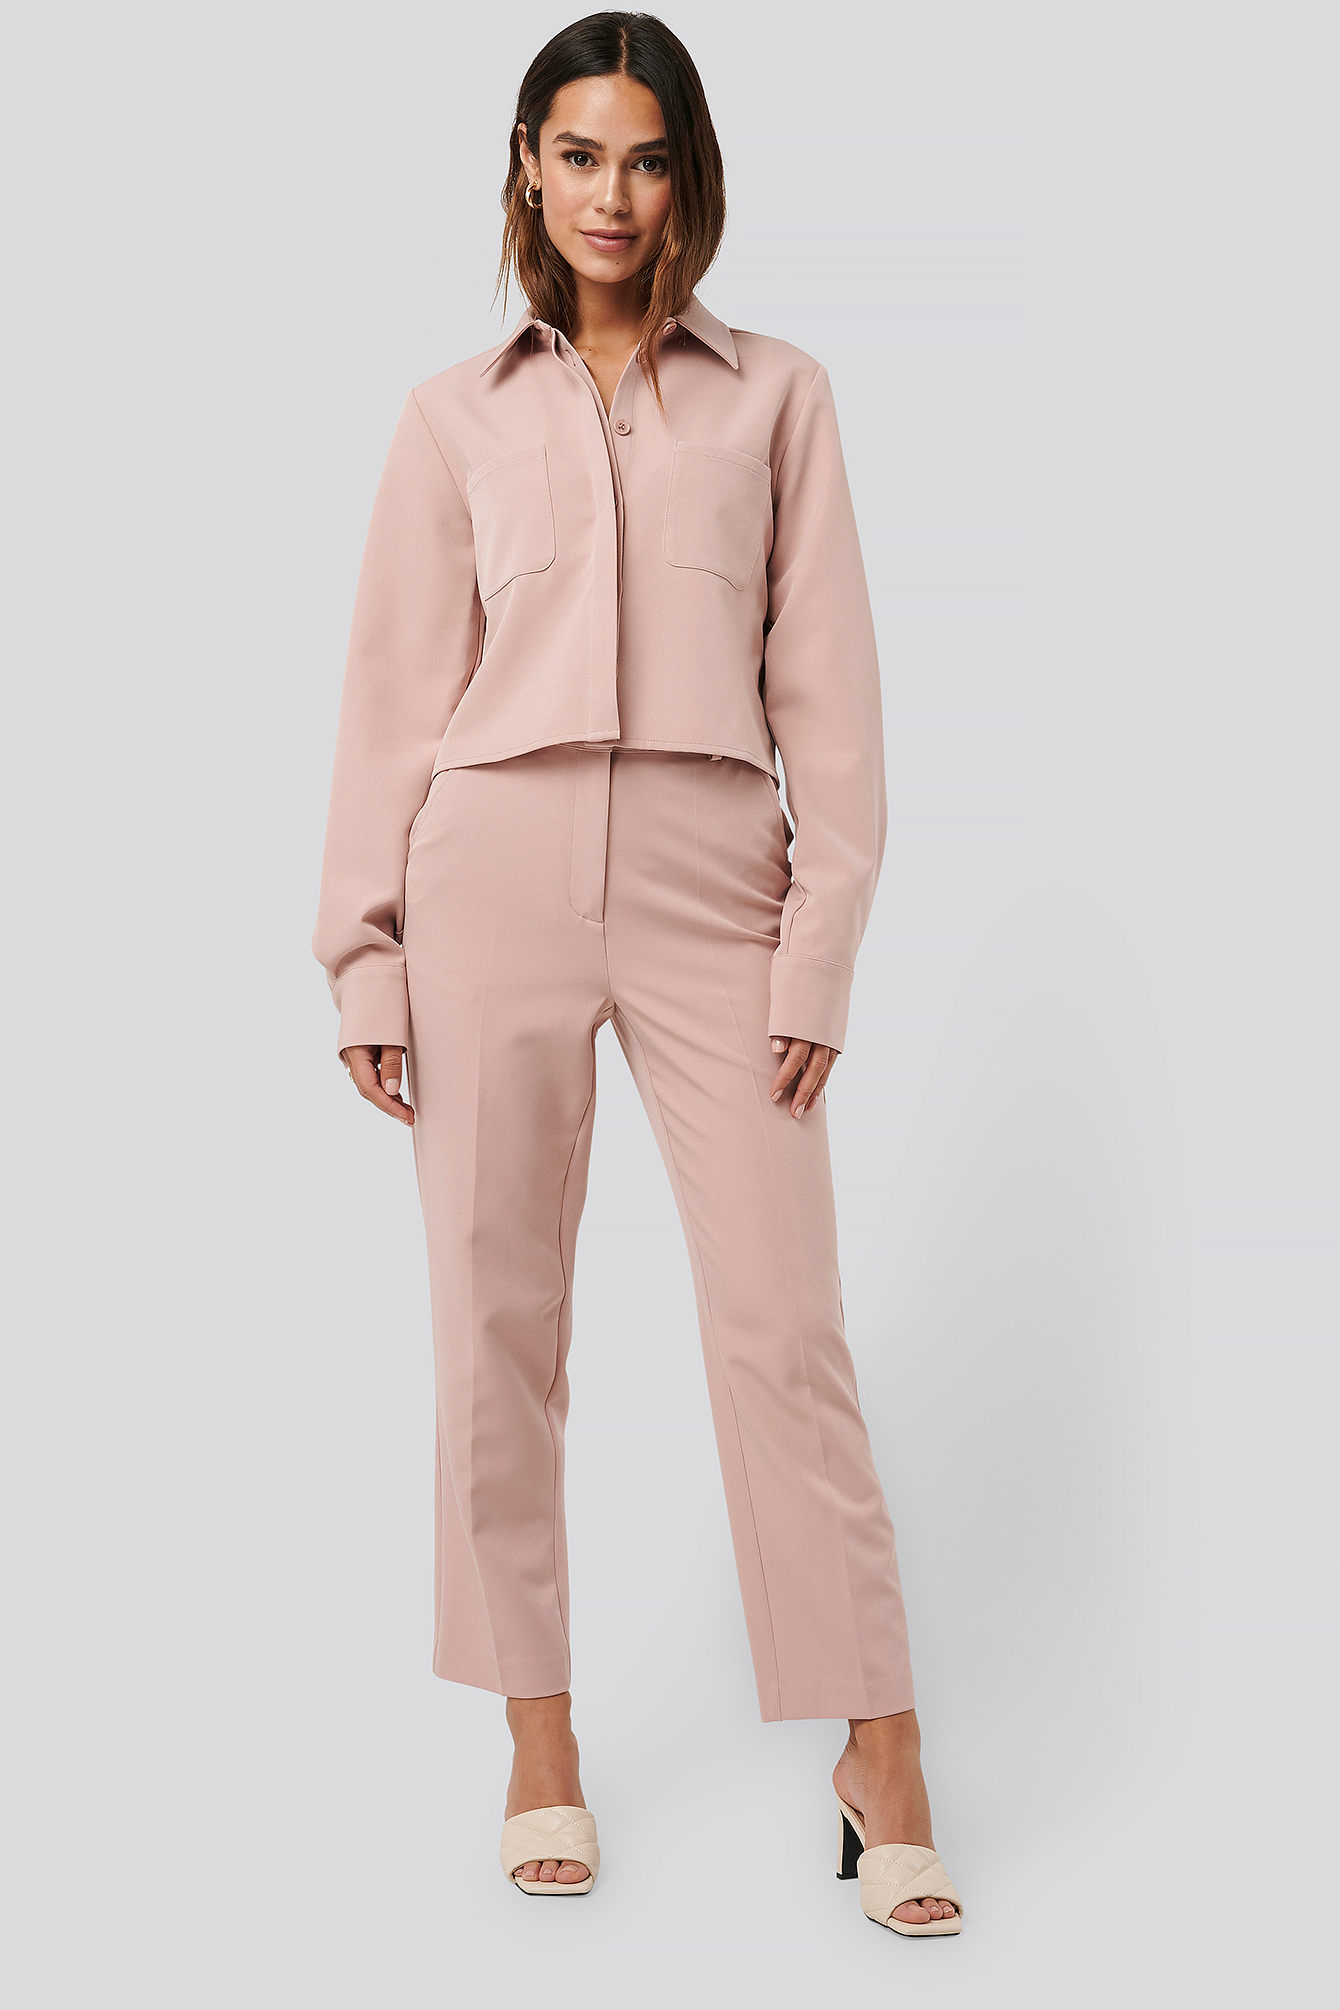 NA-KD Synthetik Classic Tailored Cropped Suit Pants in Pink Damen Bekleidung Oberteile Hemden 